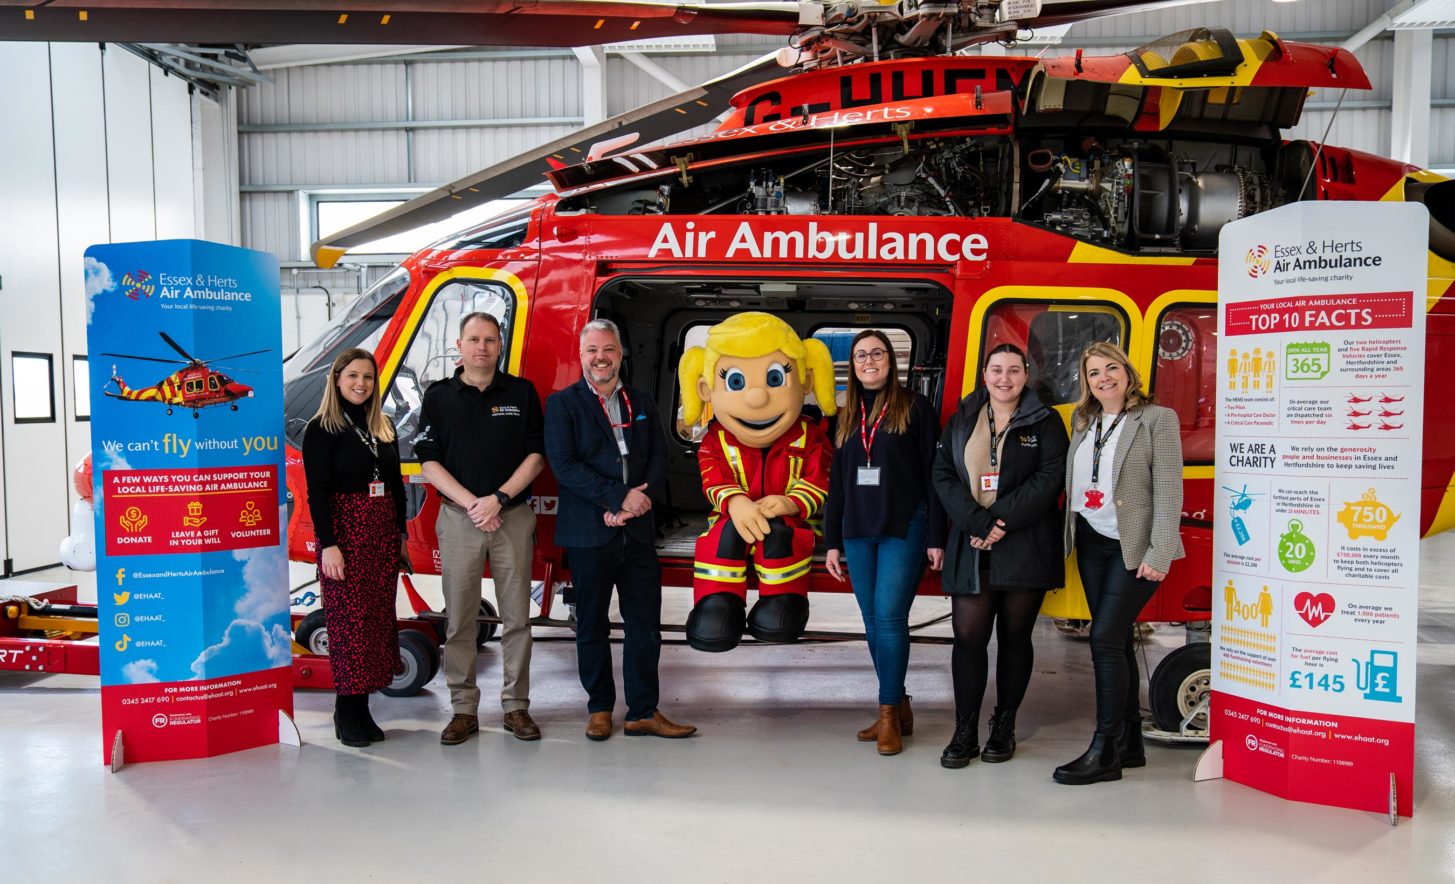 Essex and Hearts Air Ambulance